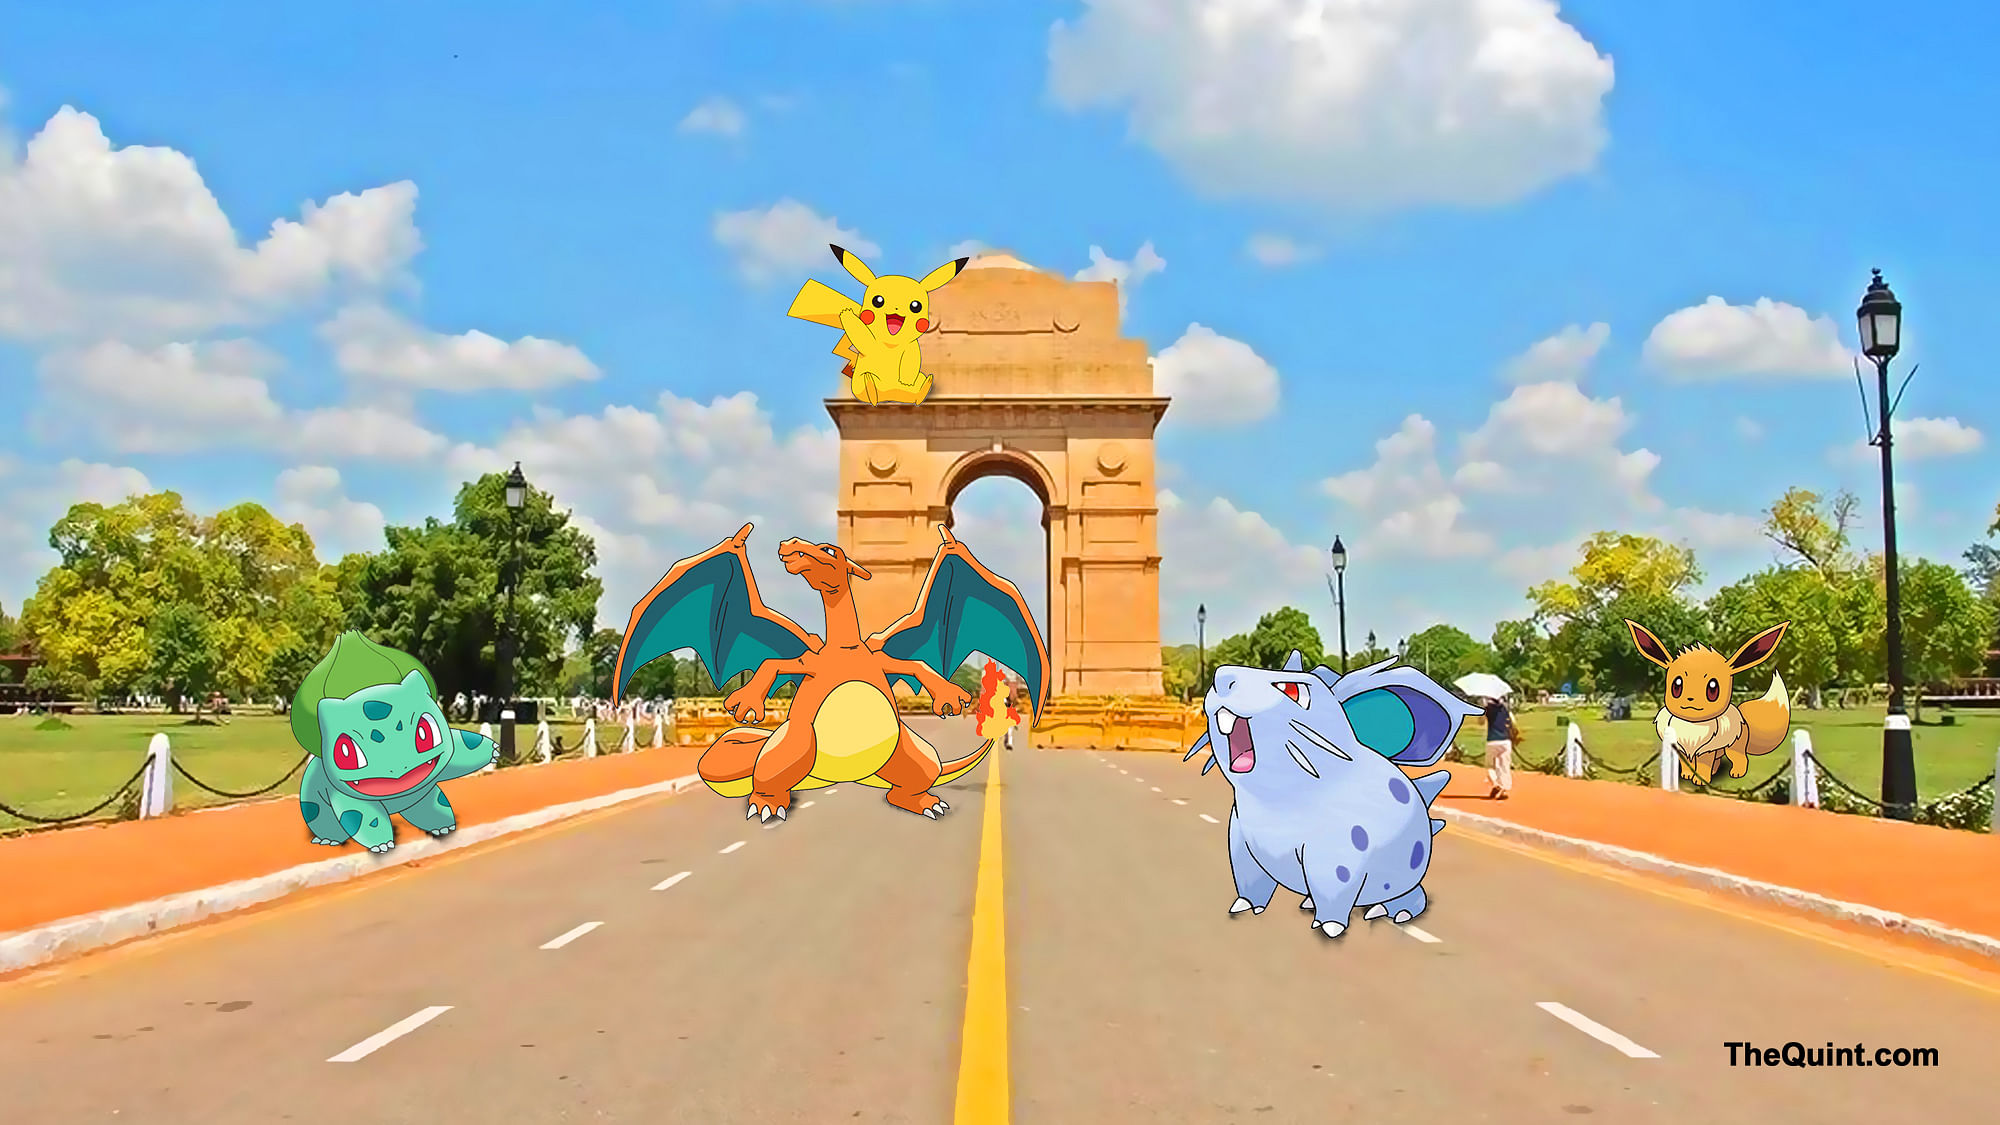 4 Things That Could Go Wrong While Playing Pokemon Go In India